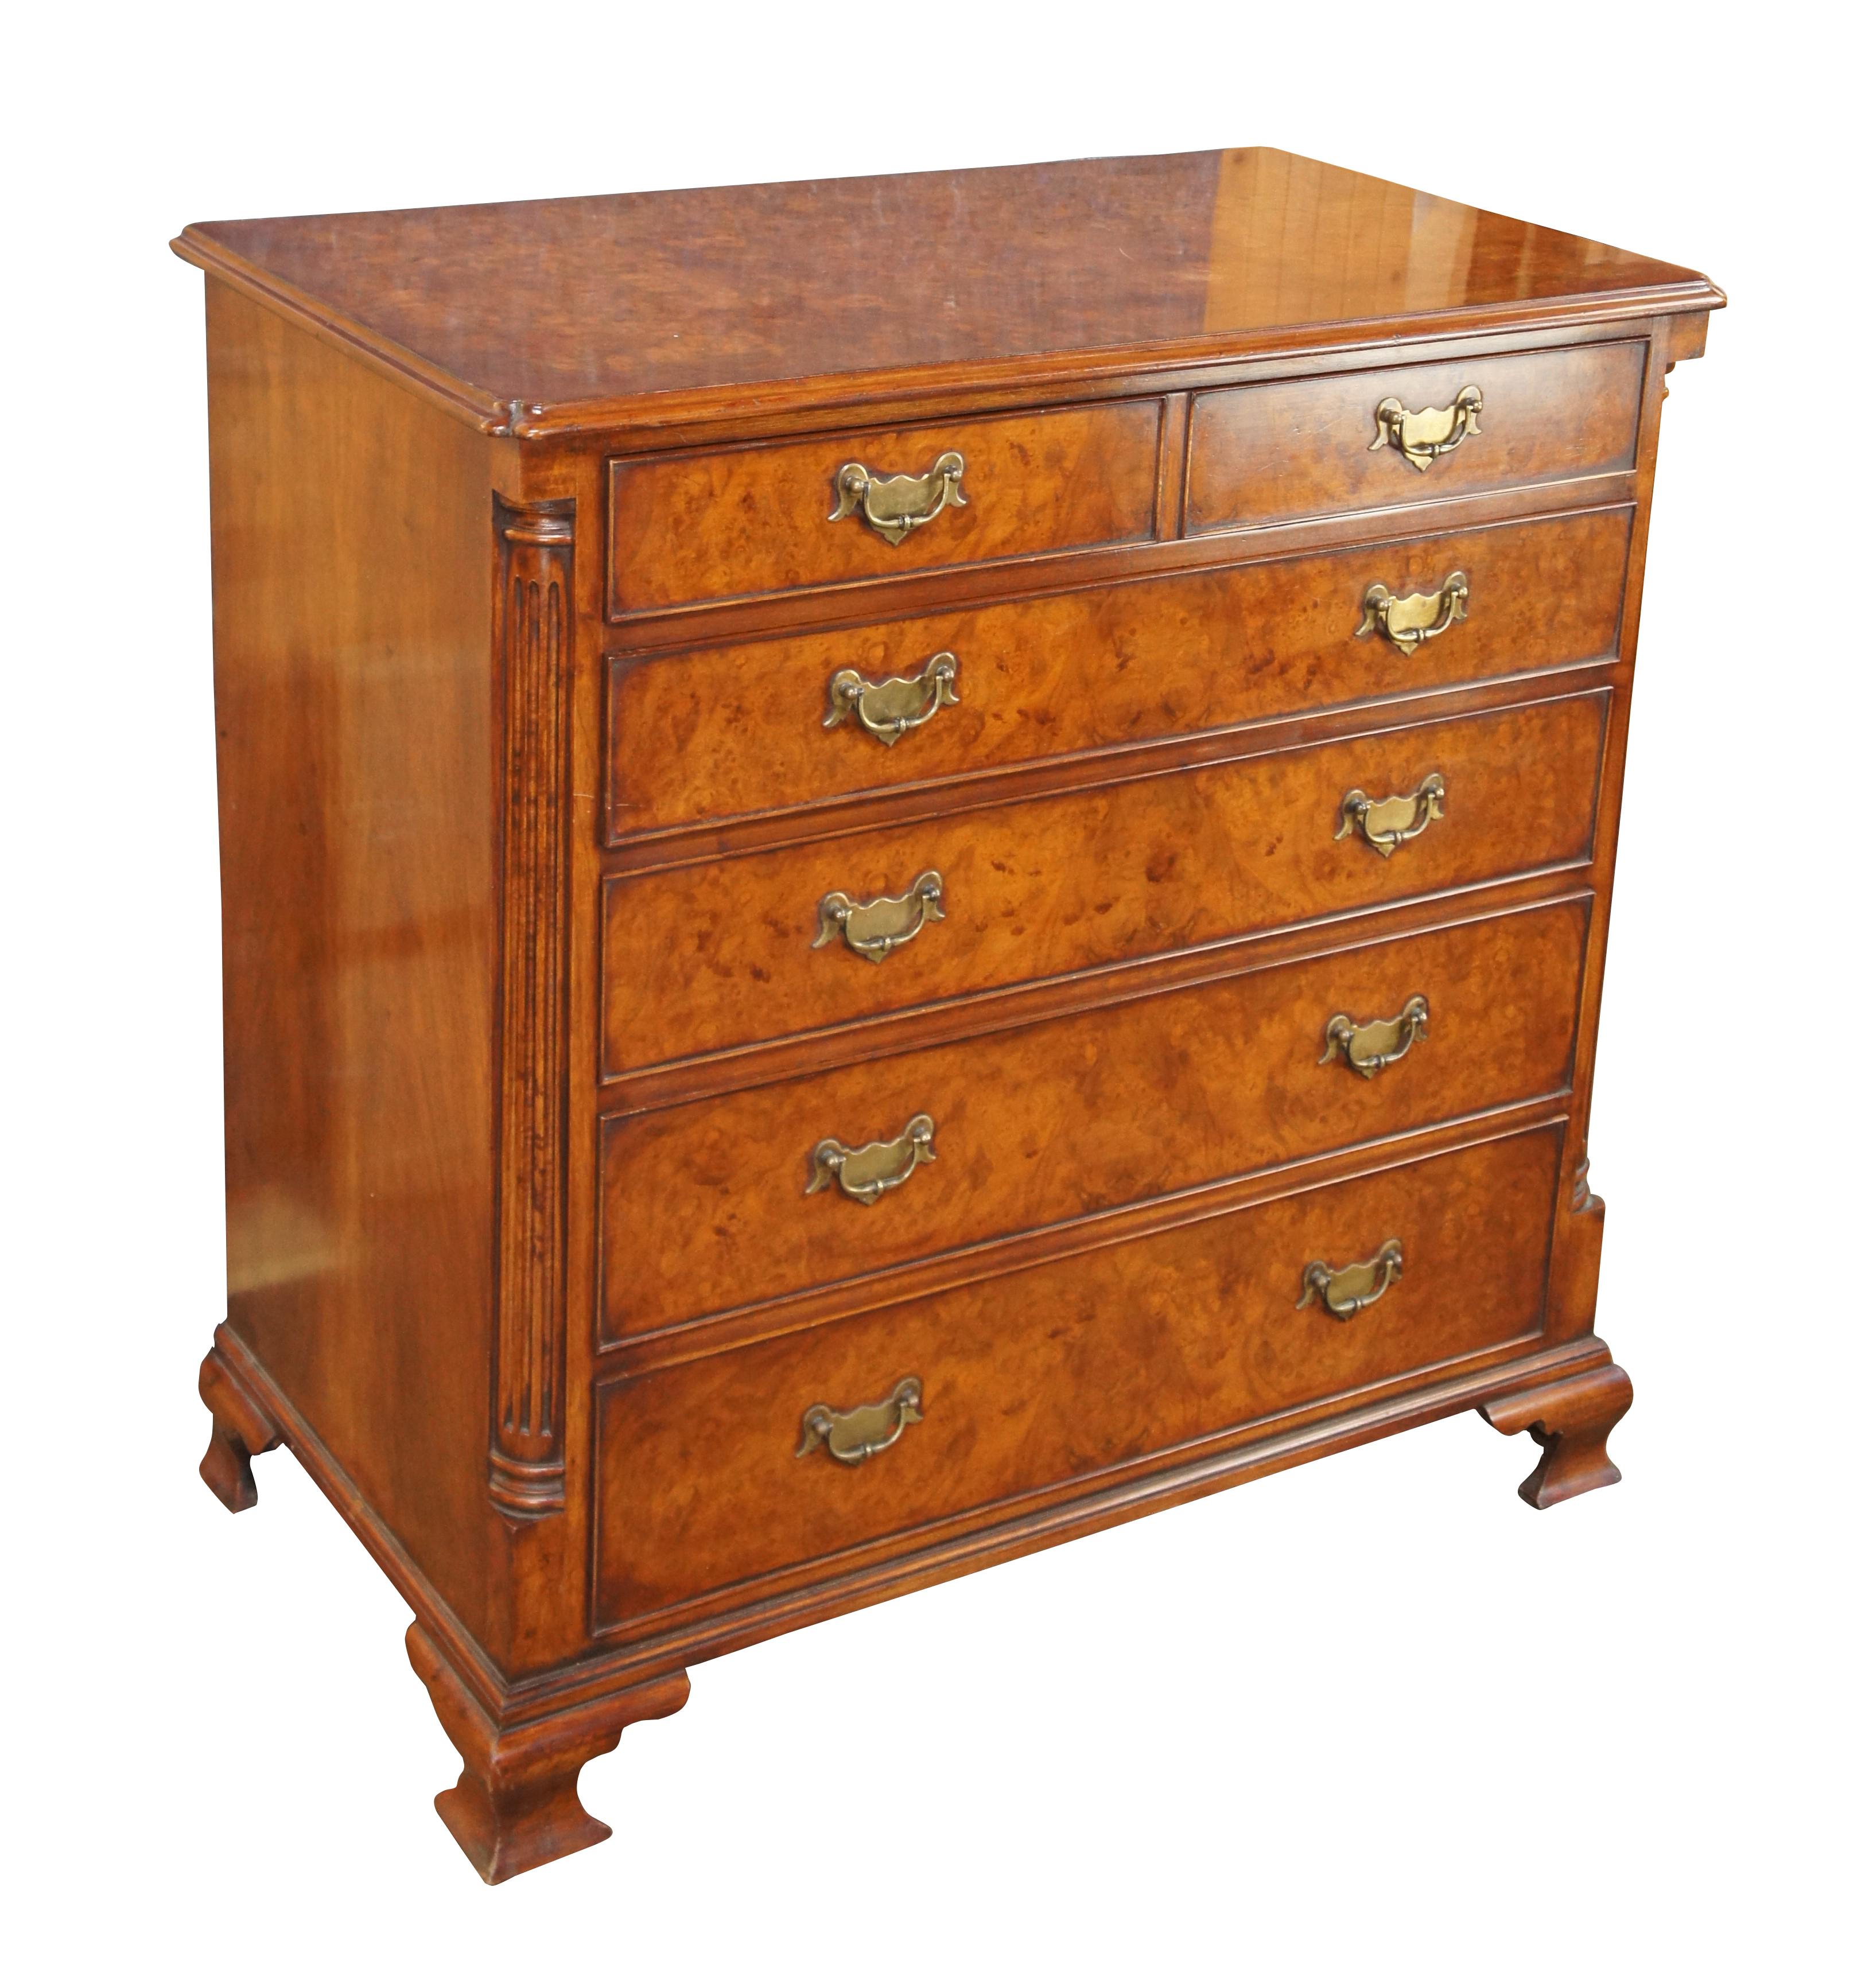 An exquisite 18th Century reproduction bachelors chest by Arthur Brett & Sons. Made from mahogany with burled front and top. Features a 2 over 4 drawer graduated design. Drawers are constructed from oak with dovetailing and colonial brass batwing